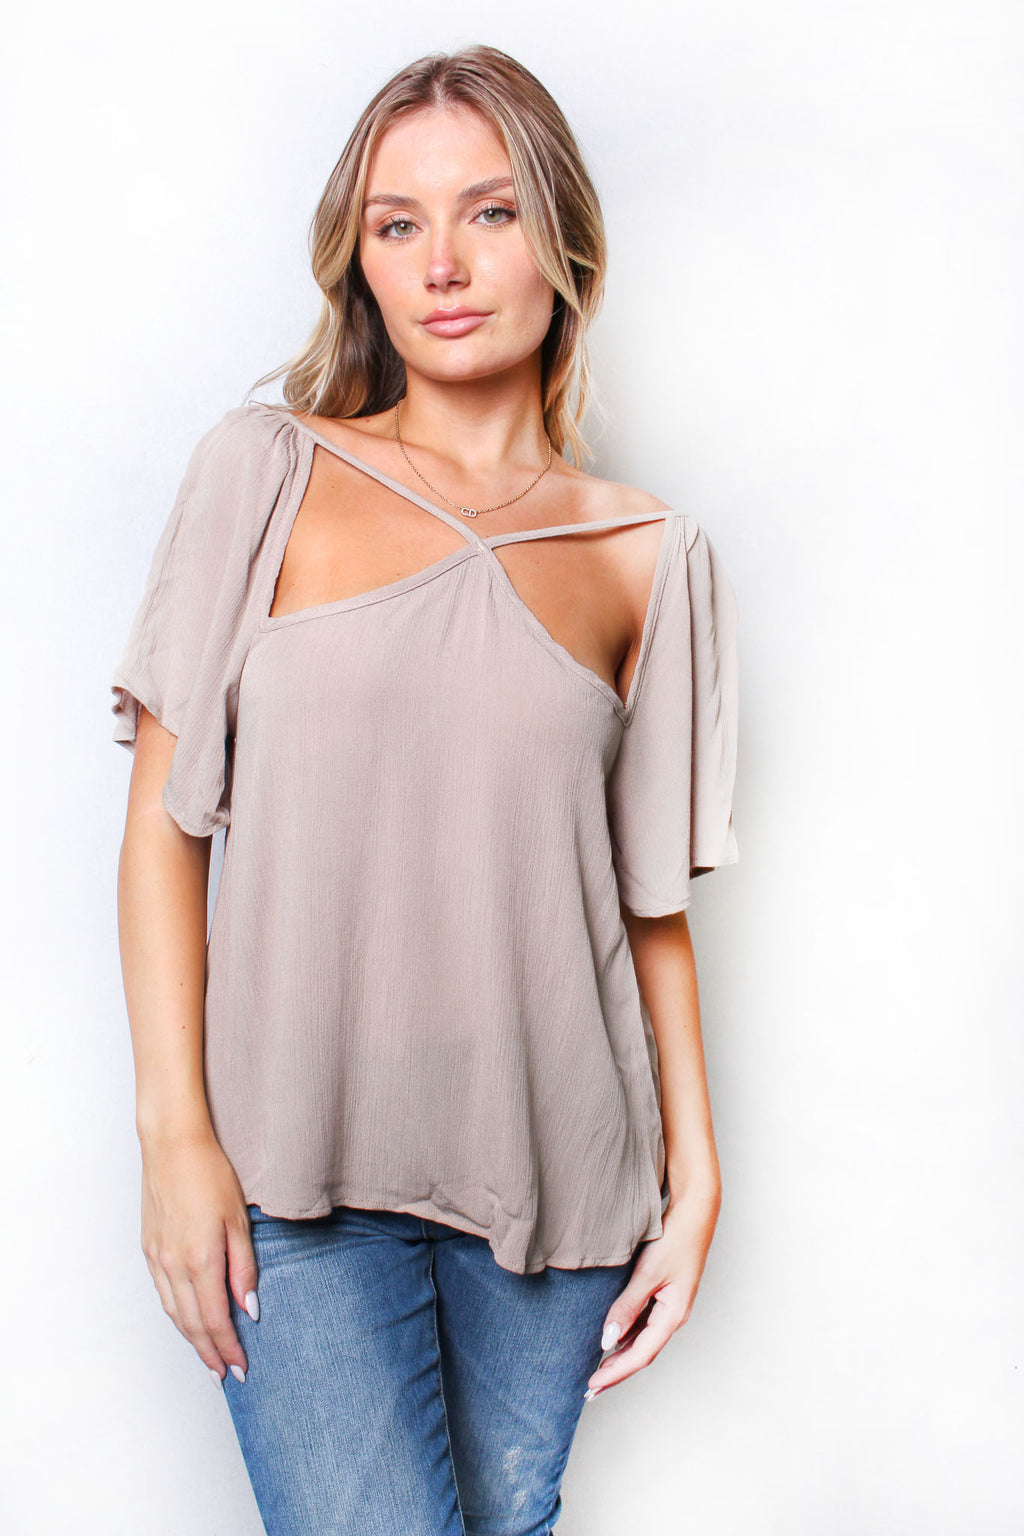 Women's Short Sleeve Strappy Cut Out Embellished Top